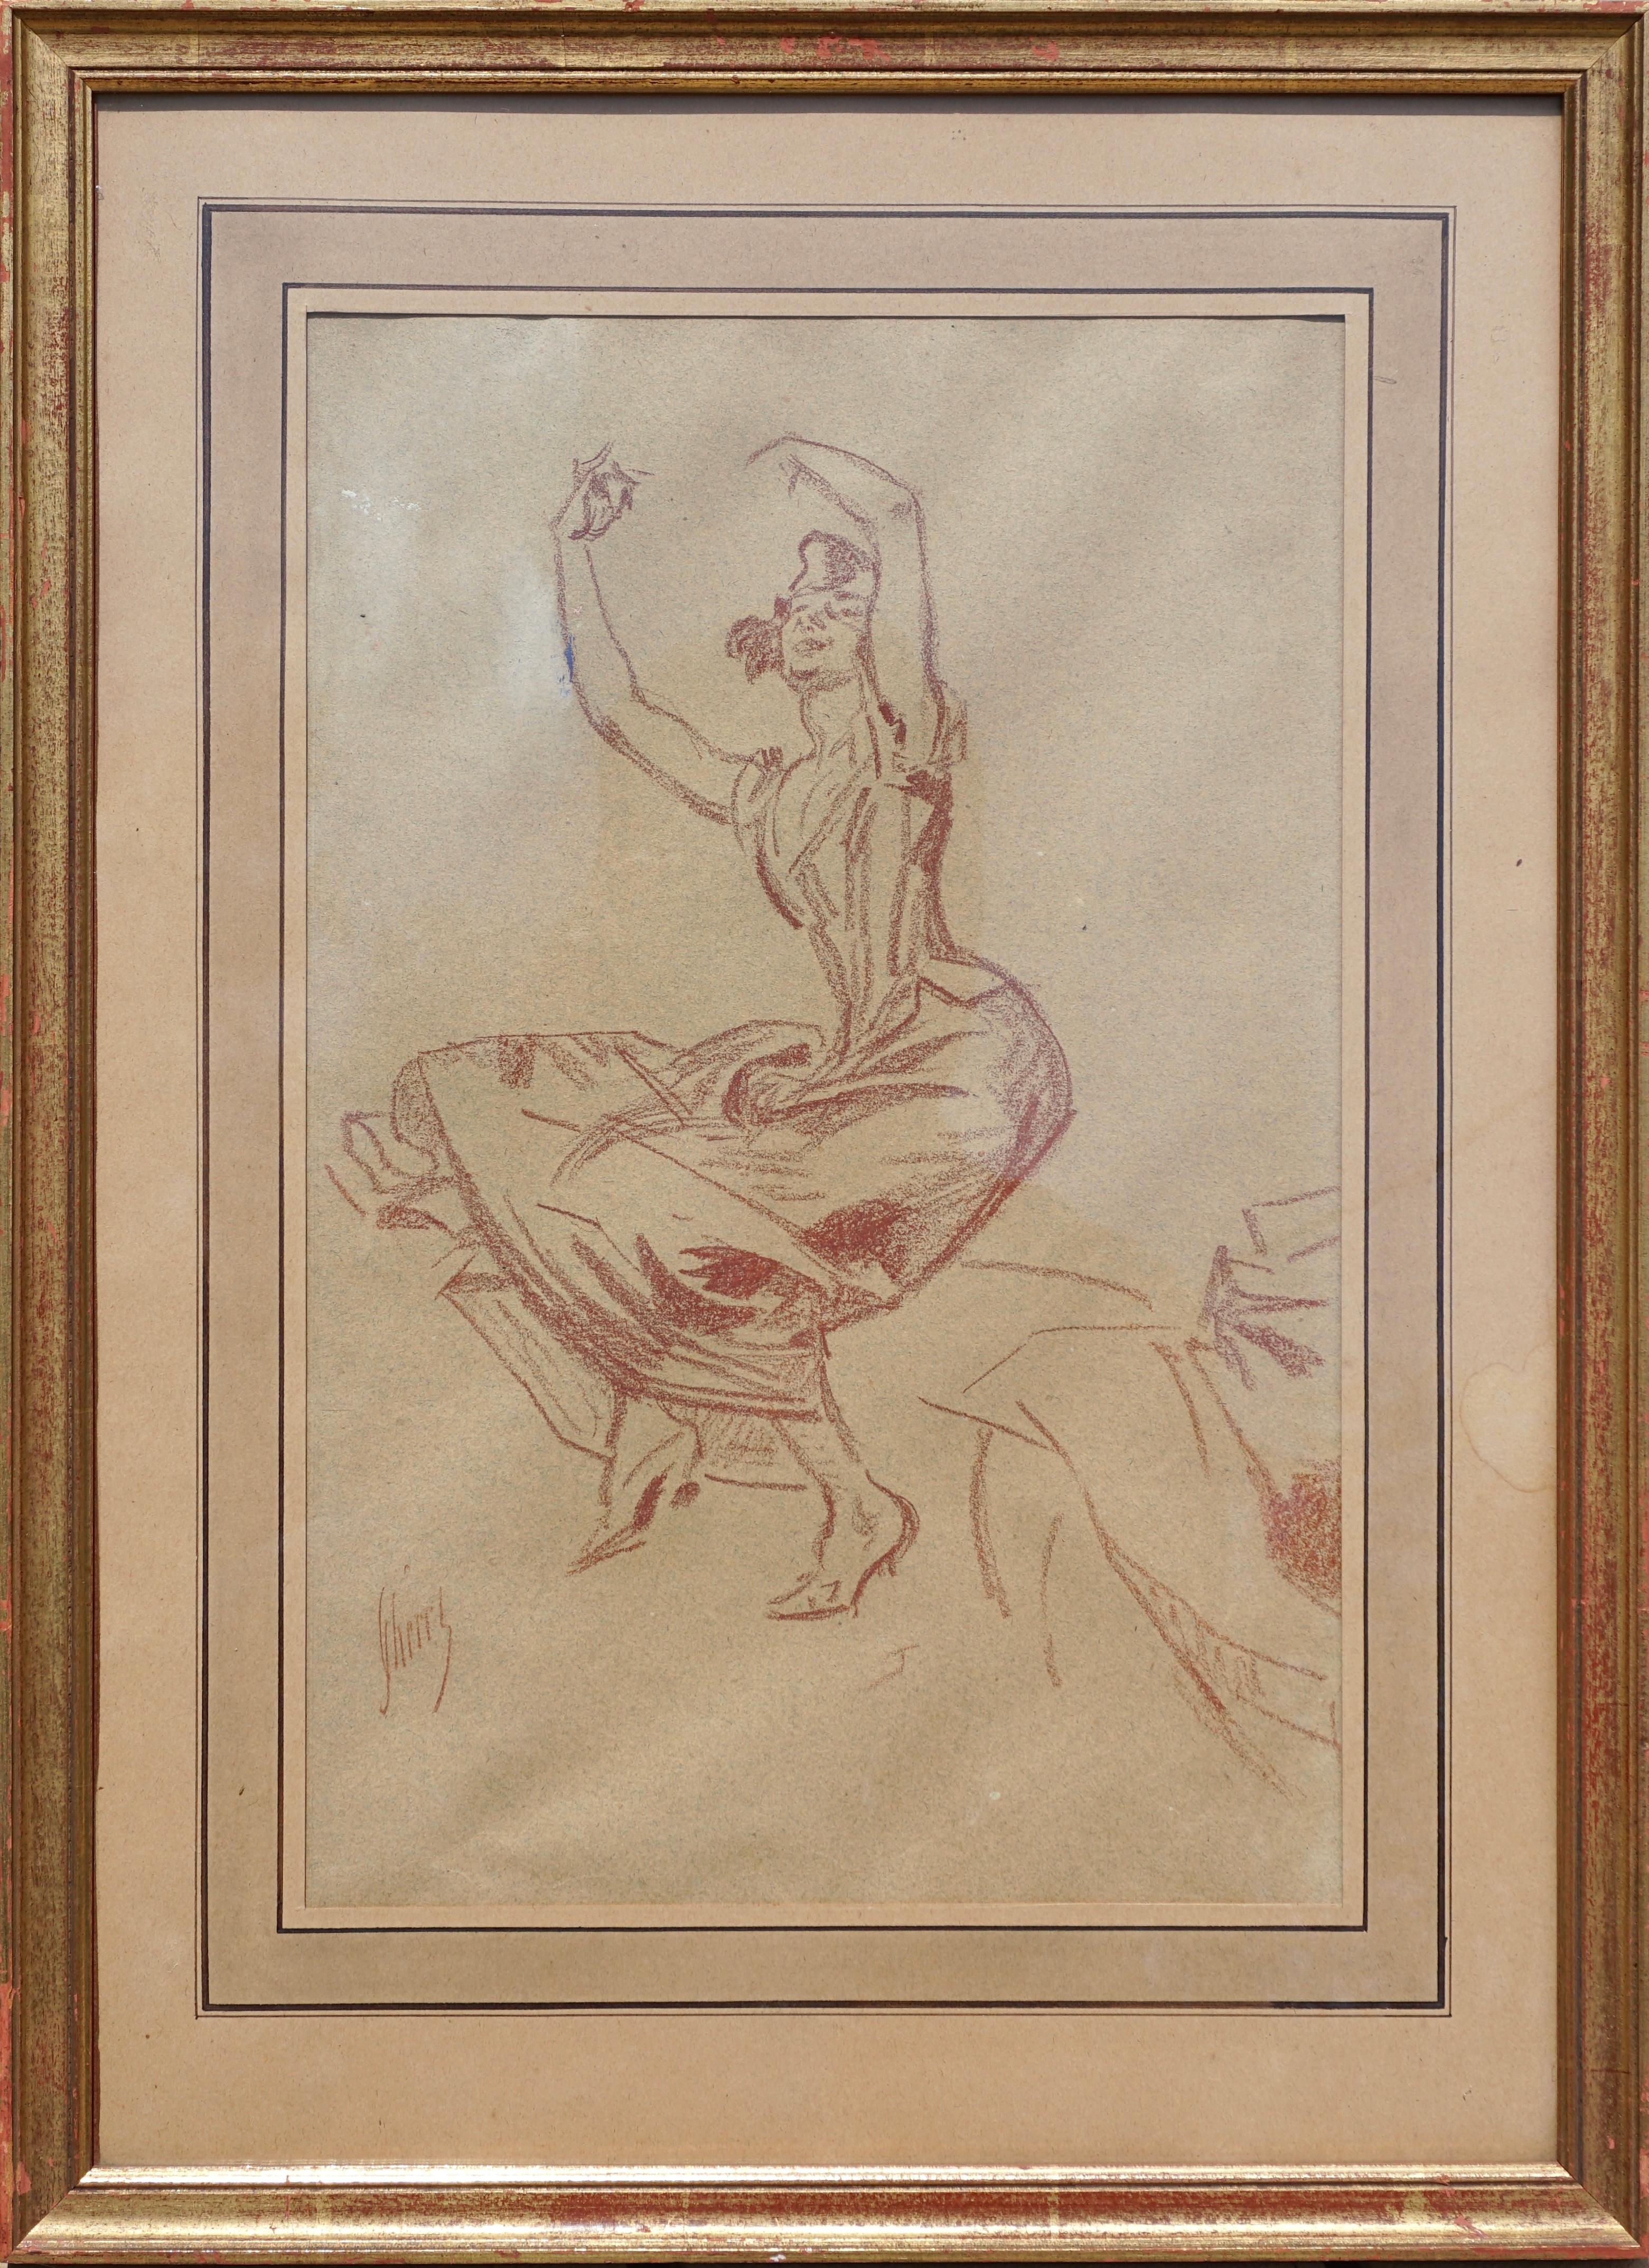 Jules Cheret (French, 1836 - 1932) Large original crayon drawing of a beautiful woman dancing maybe with castanets. Possibly a sketch for his famous poster (Jardin de Paris - Fête de nuit bal, 1890) 

Signed LL “J Cheret”

Sheet size: 16 X 11